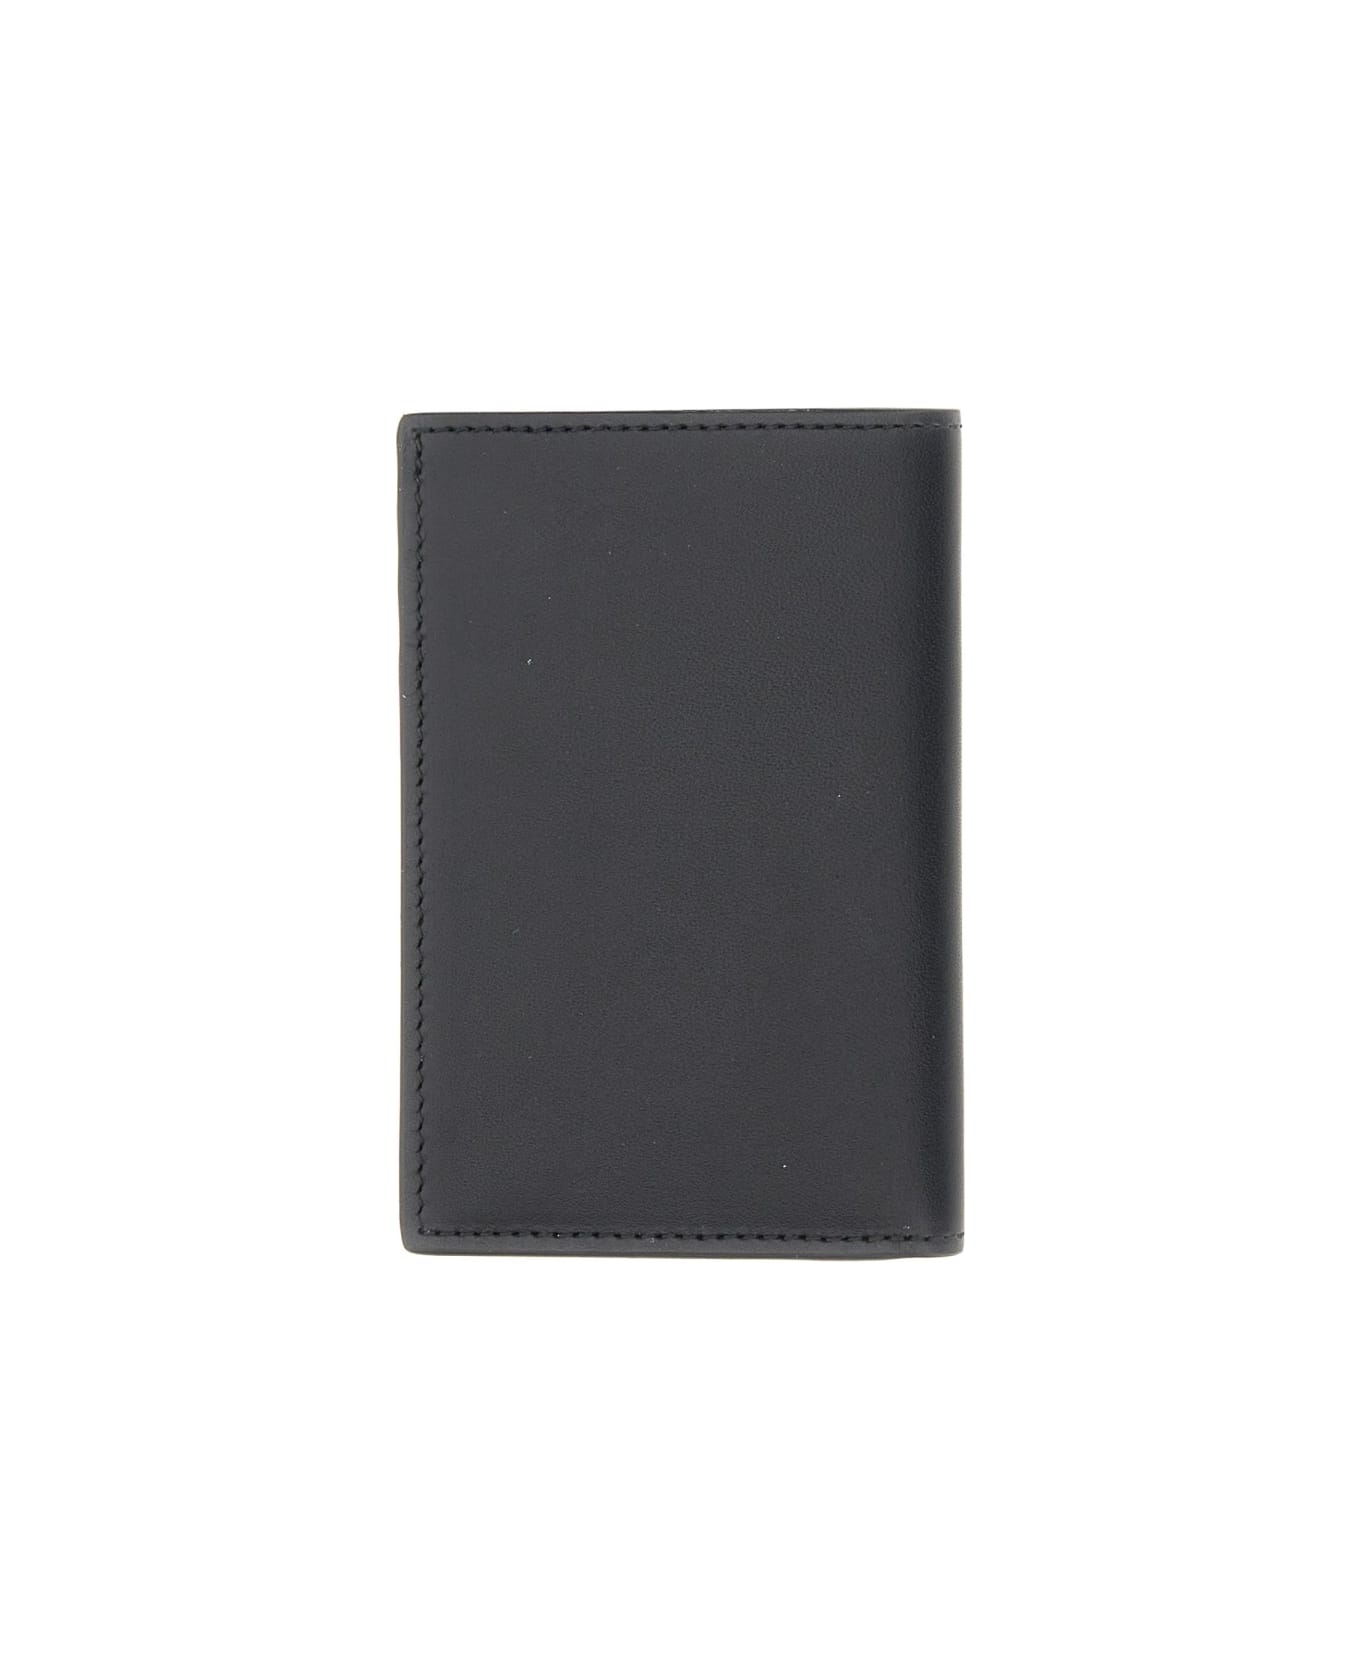 Paul Smith Leather Wallet - BLACK